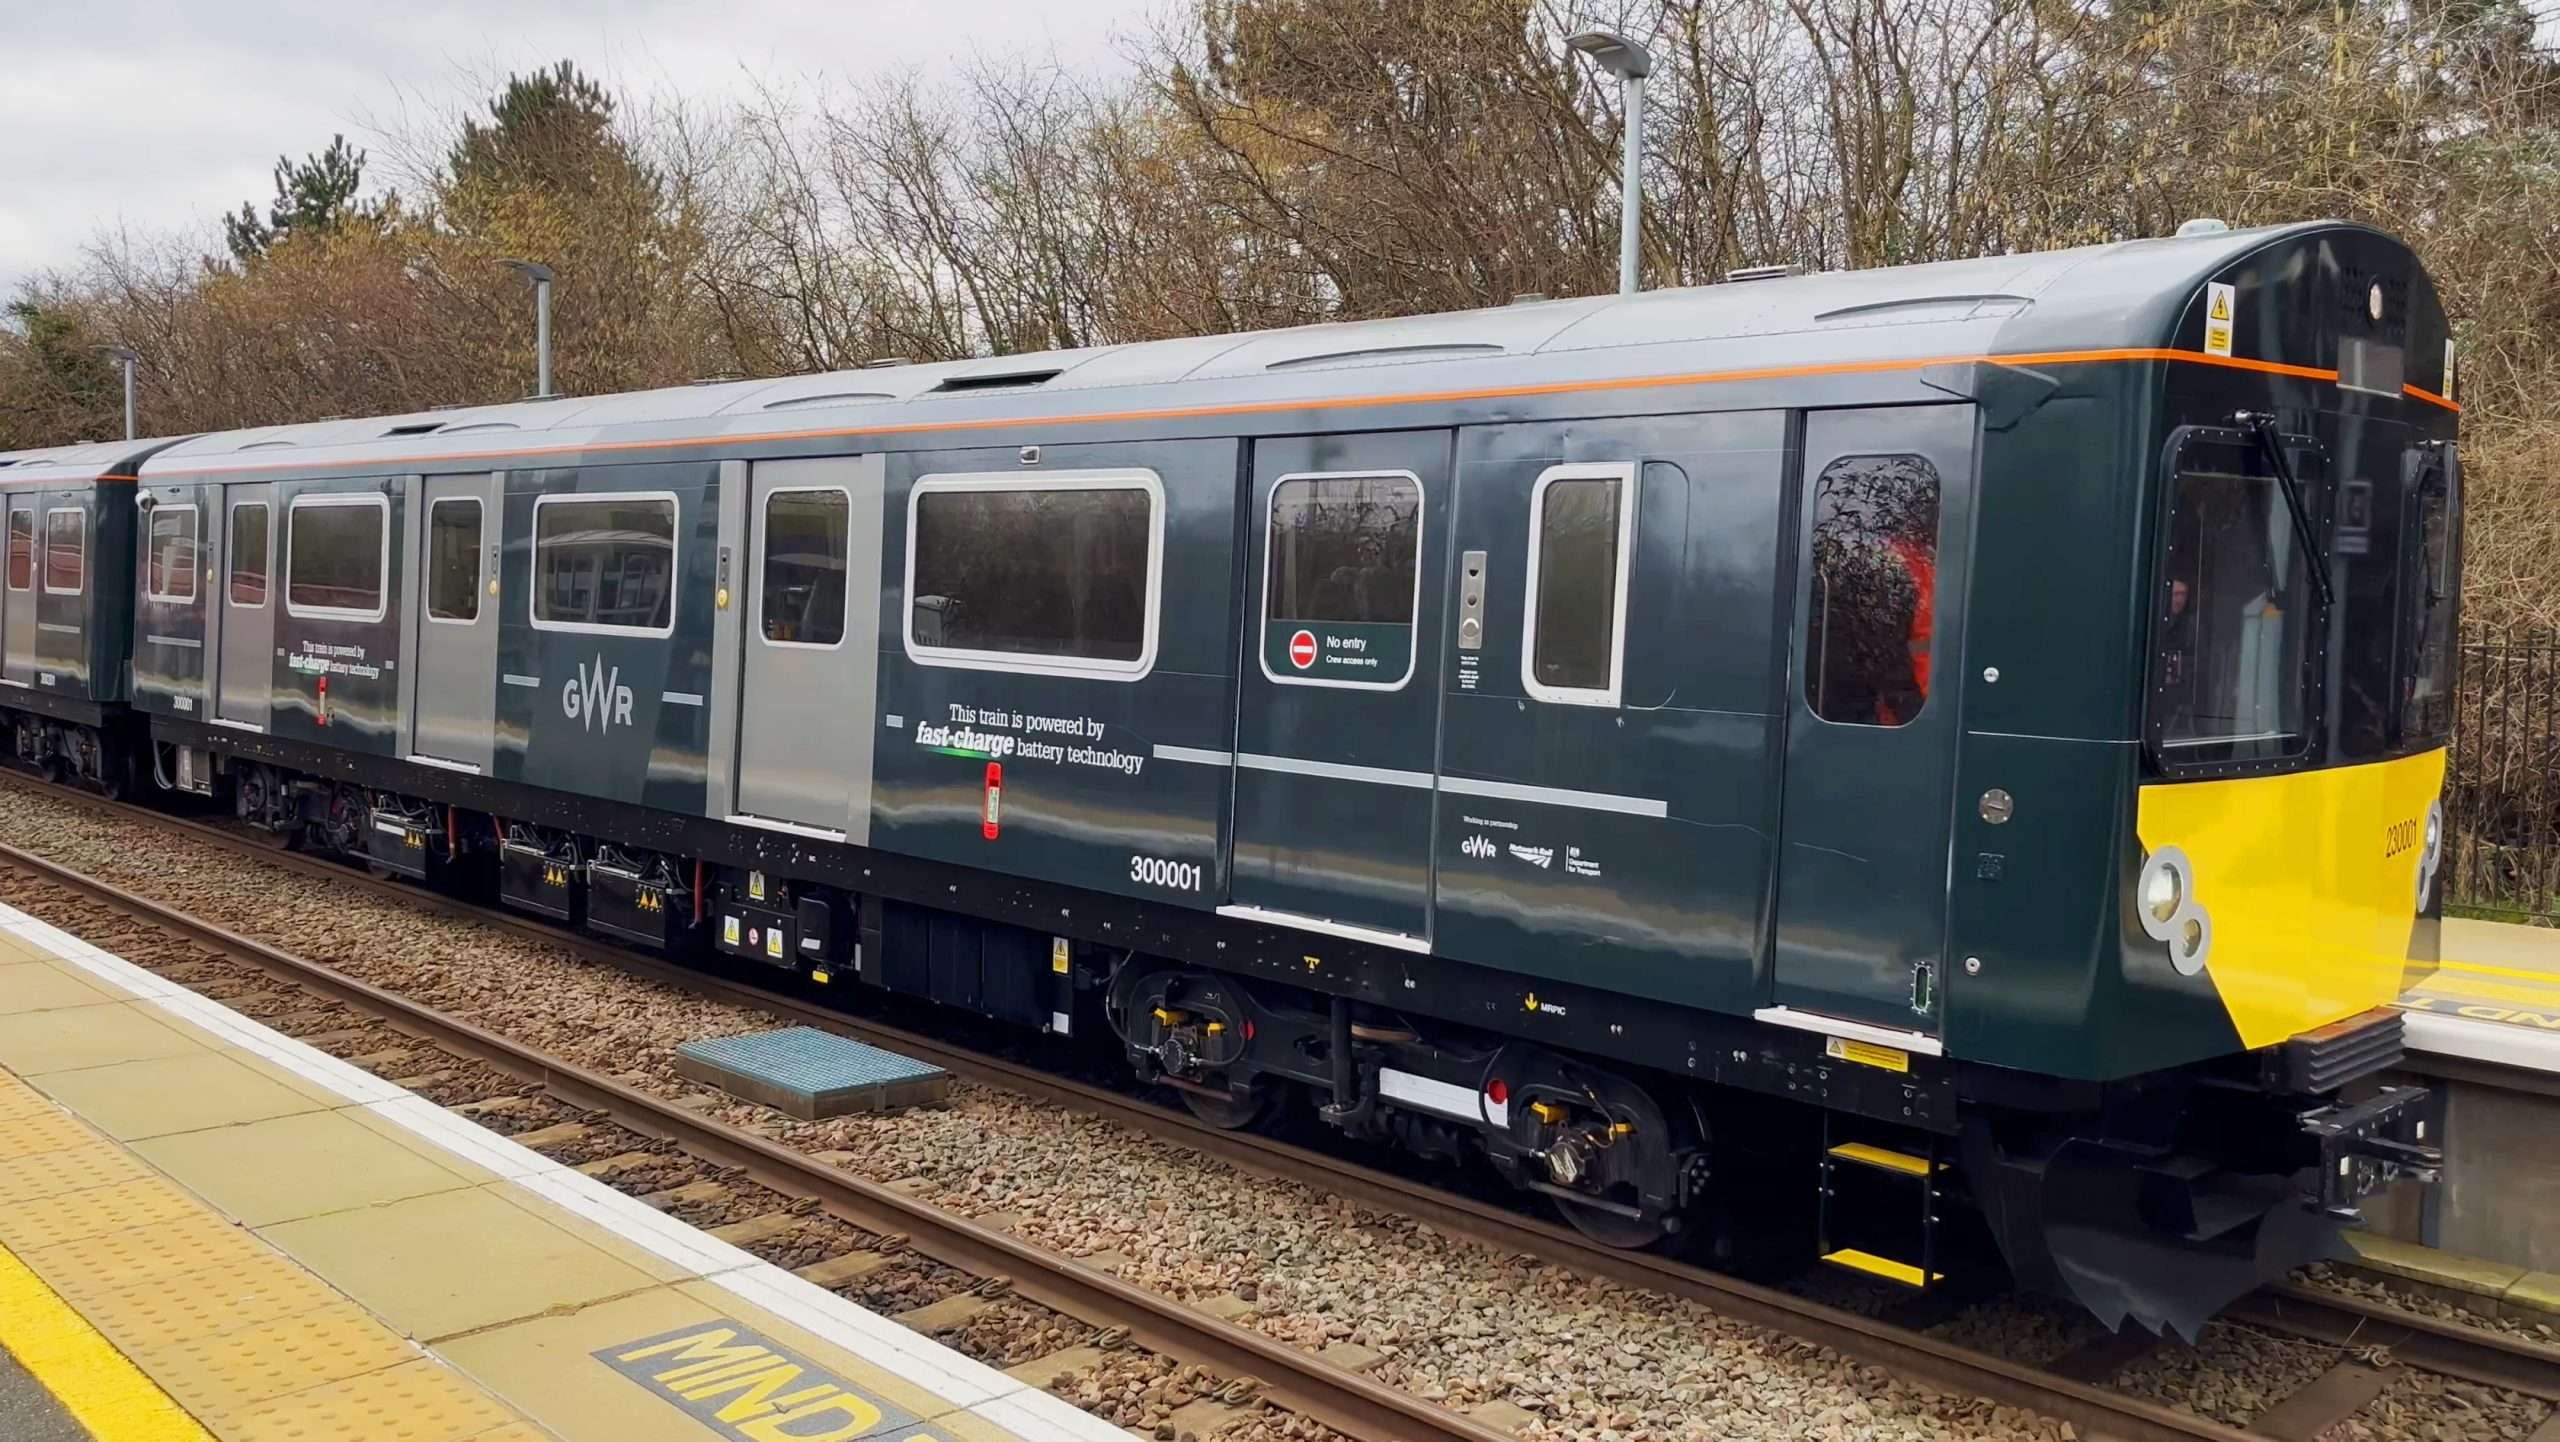 GWR powers forward with innovative FastCharge battery train trials